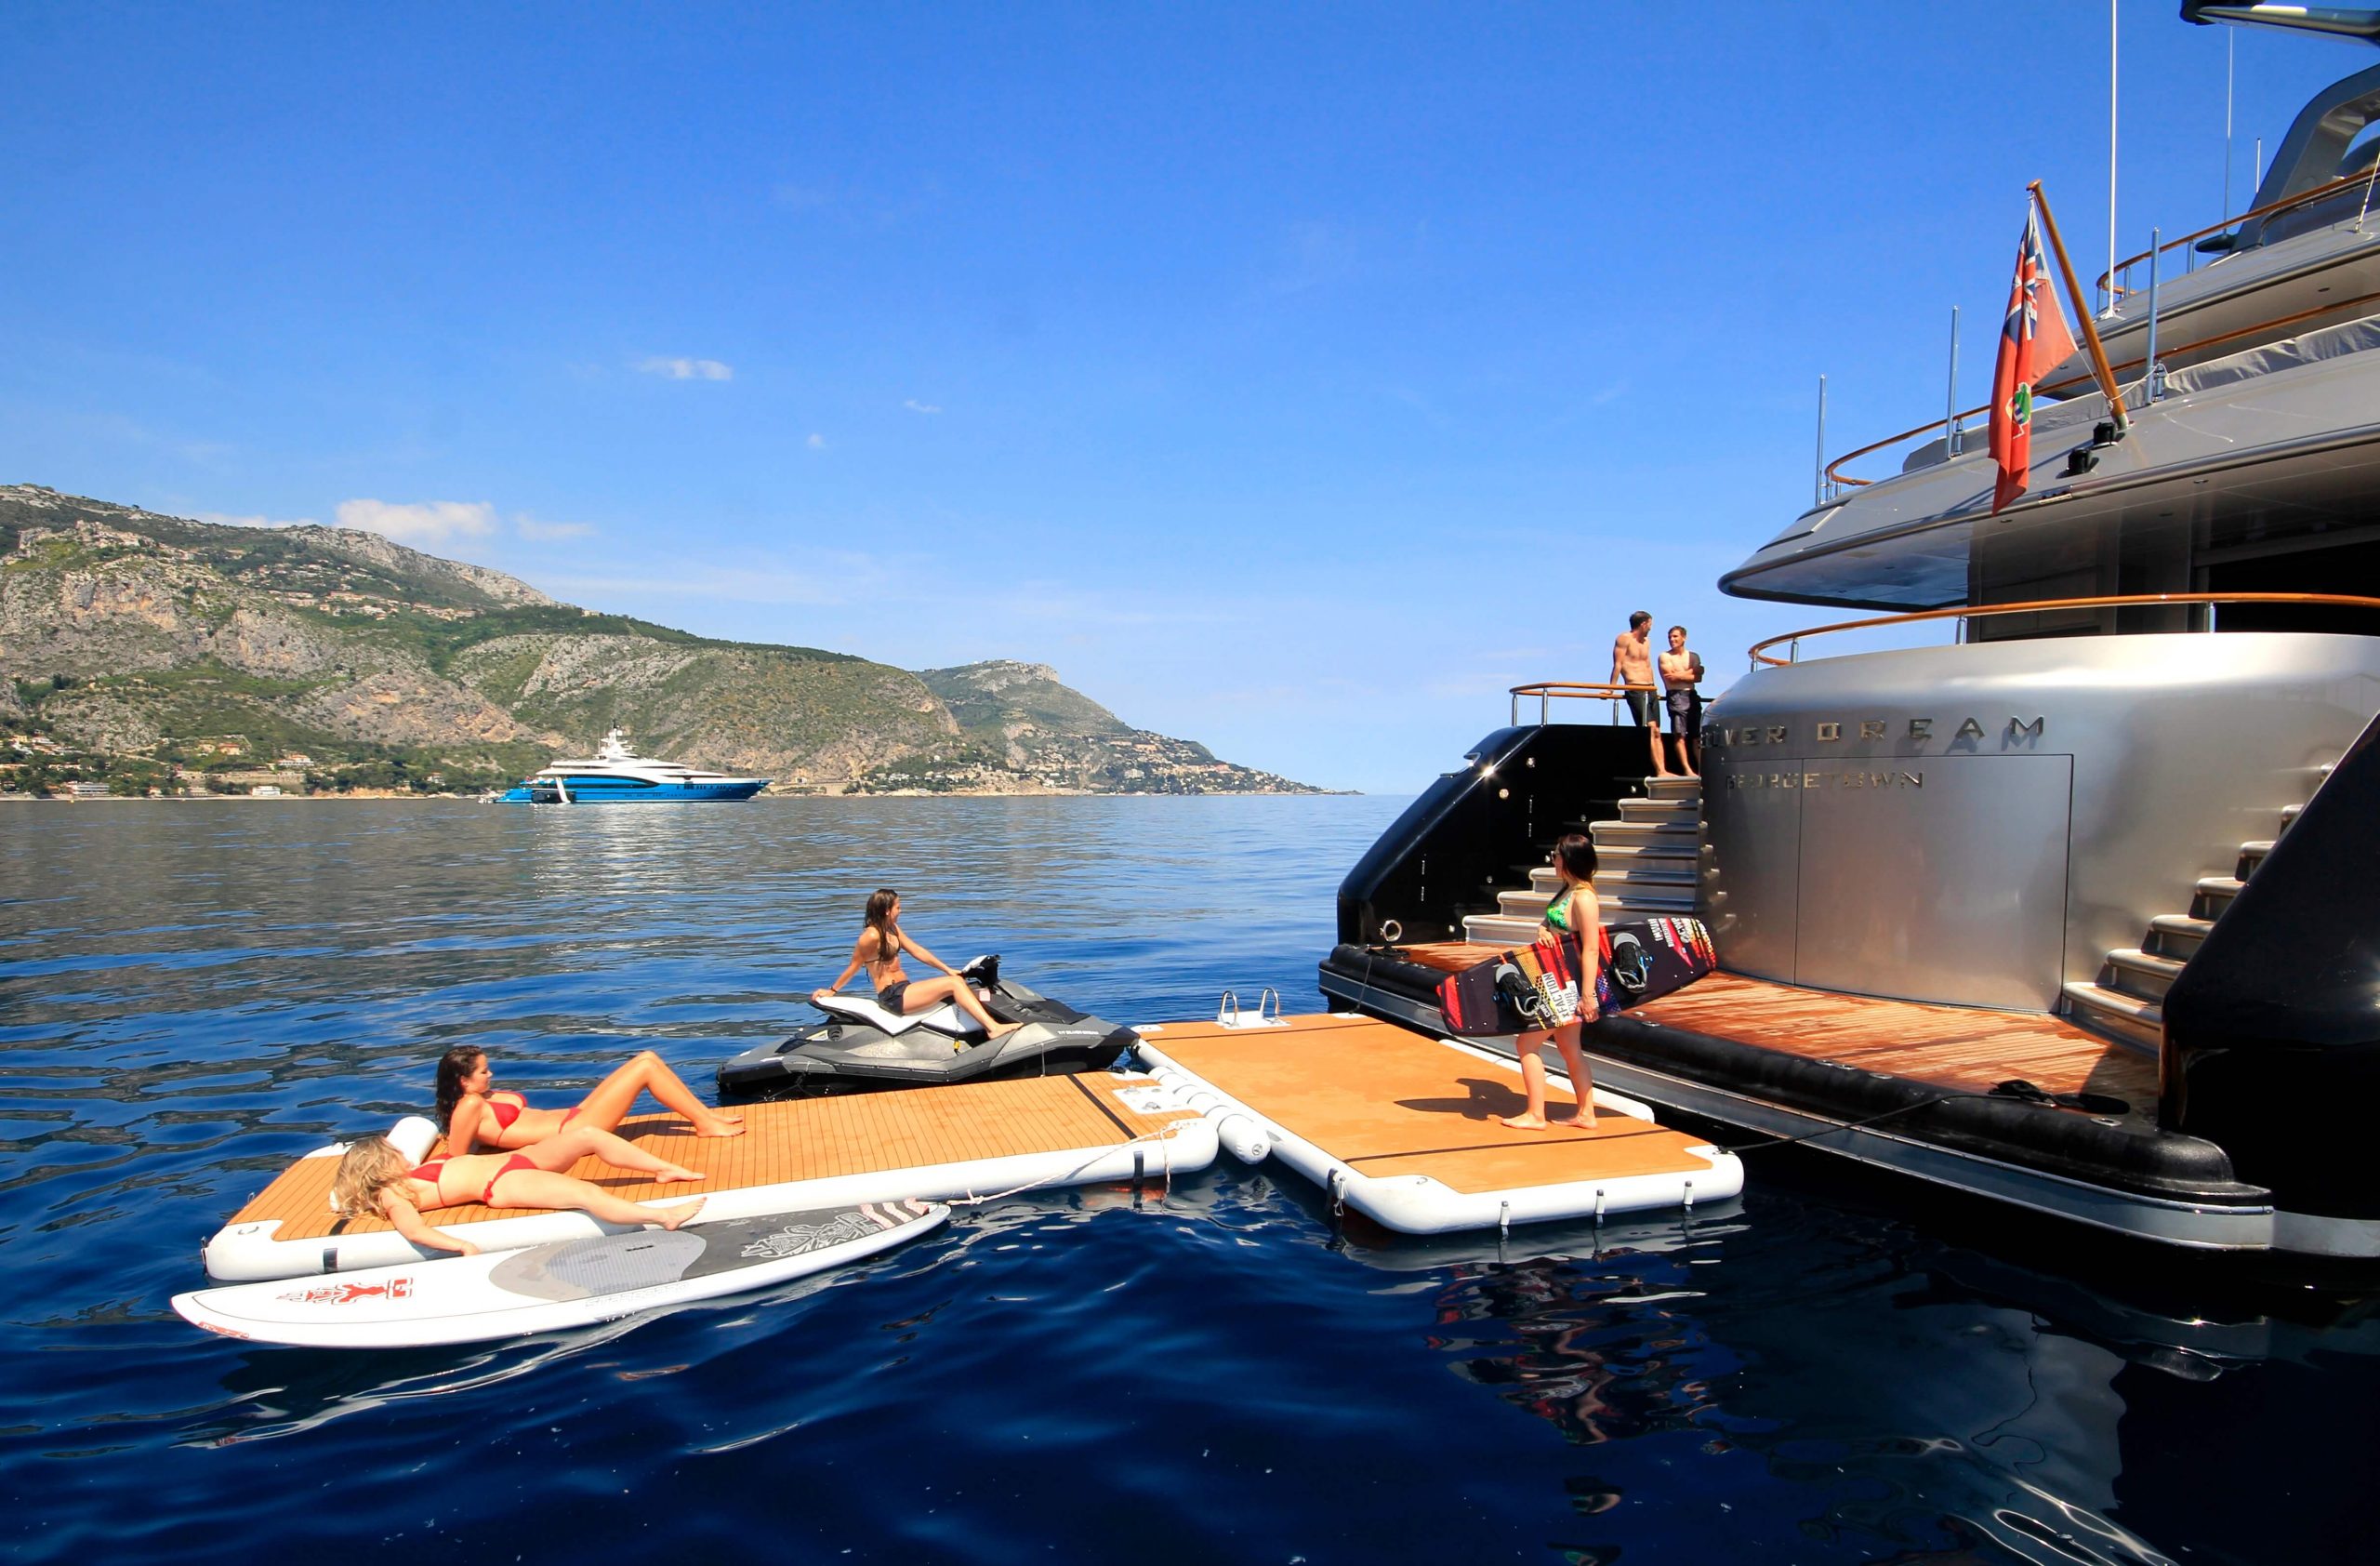 Holiday makers swimming and sunbathing on yacht